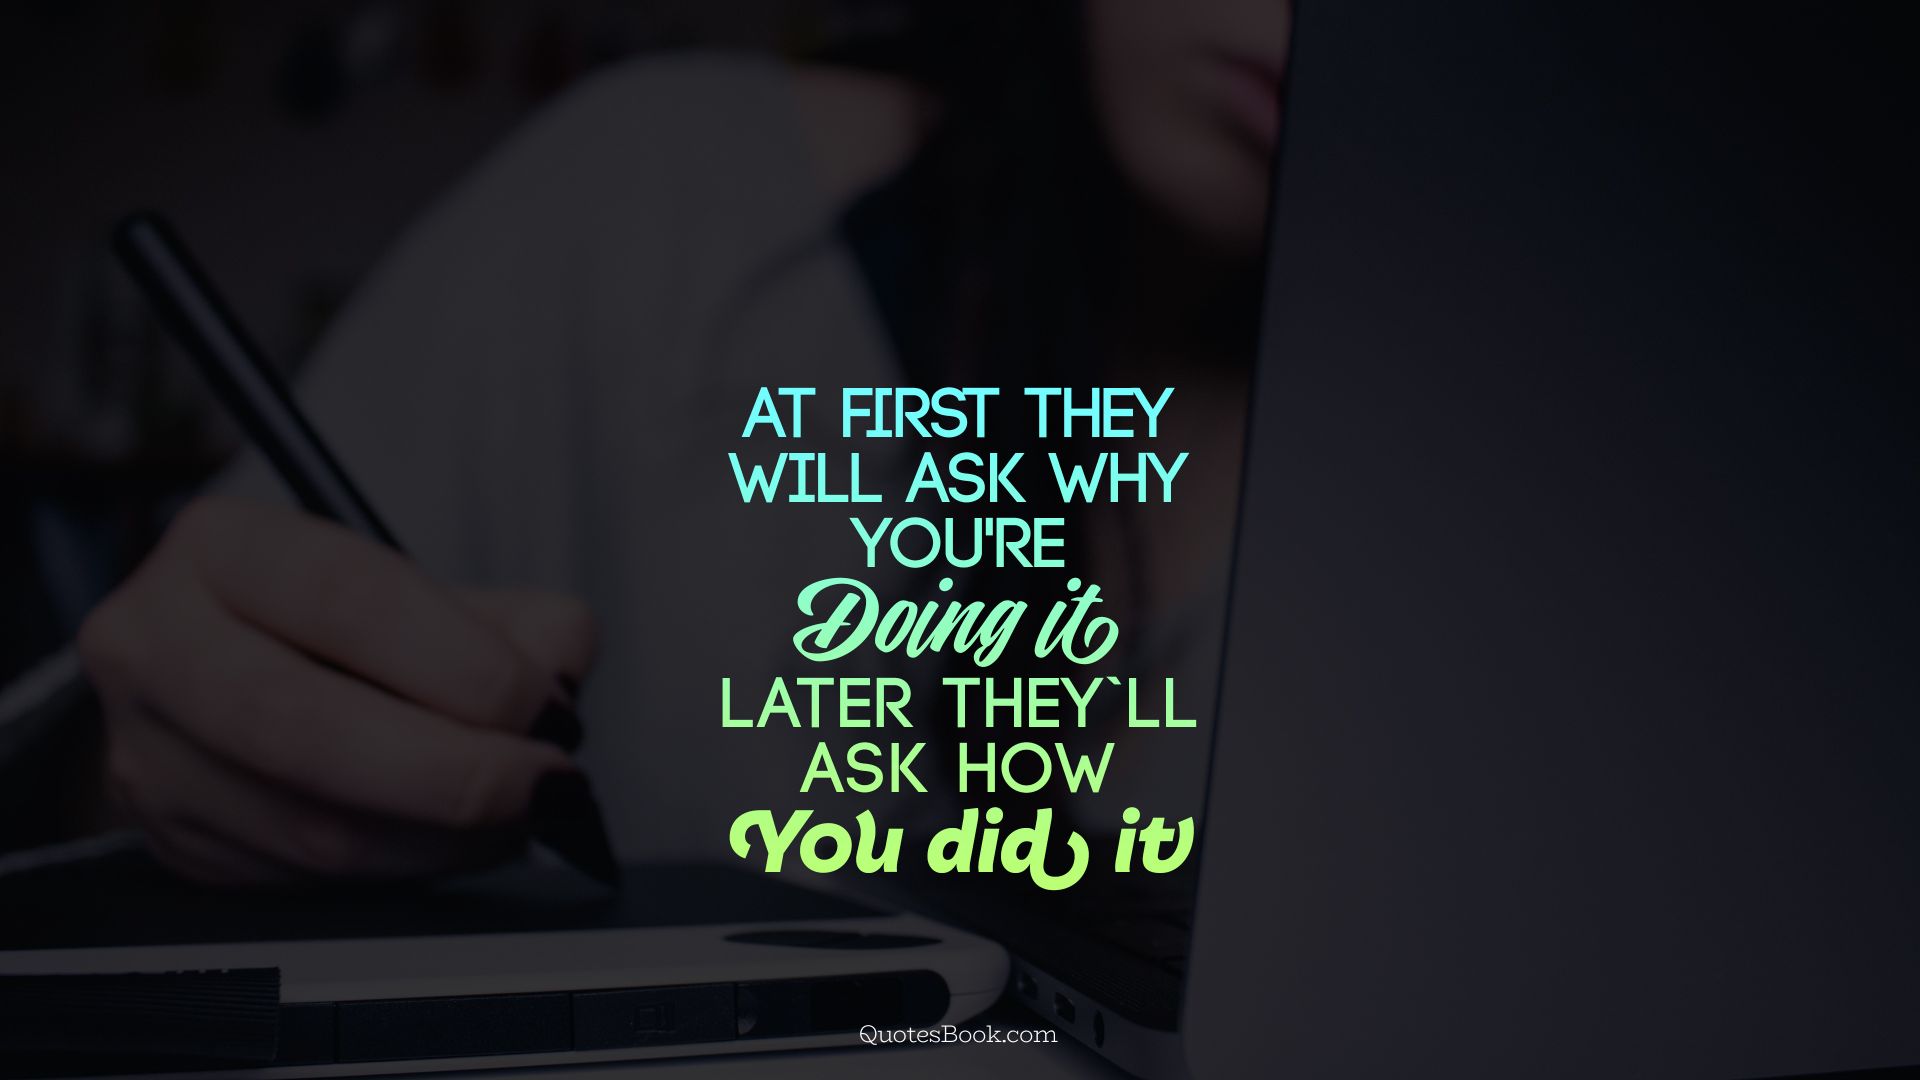 Аt first they will ask why you're doing it. later they'll ask how you did it